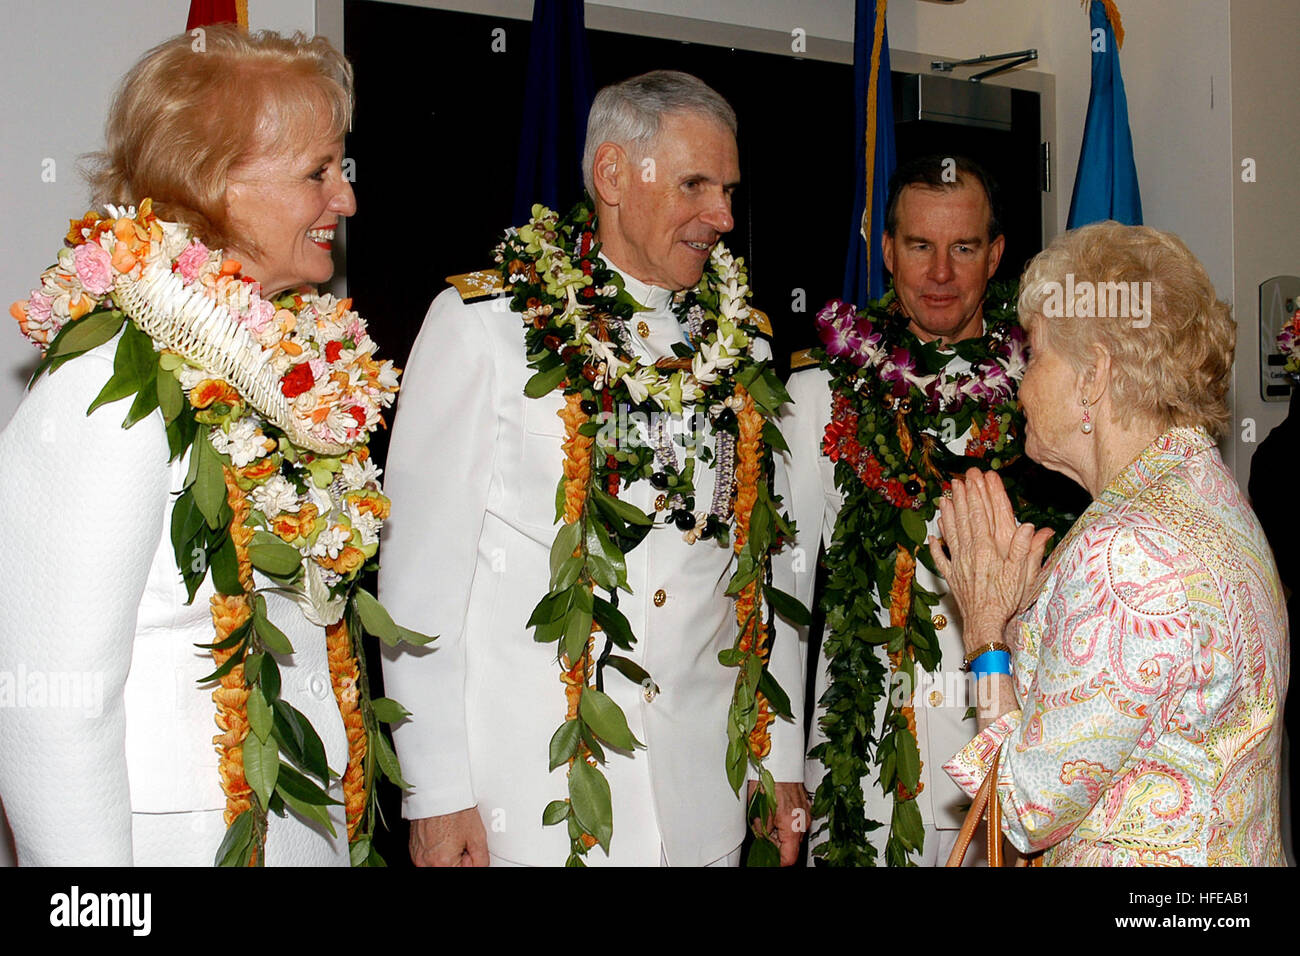 050226-N-5640H-119 Camp Smith, Hawaii (Feb. 26, 2005) Ð Adm. William J. Fallon, center, Mrs. Fallon, left, and Adm. Thomas B. Fargo greet guest at the reception which immediately followed the U.S. Pacific Command (PACOM) change of command on board Camp Smith, Hawaii. Fallon relieved Fargo to become the 21st Commander, U.S. Pacific Command. U.S. PACOM's area of responsibility spans from the west coast of the United States to the east coast of Africa. PACOM was established Jan. 1, 1947 and located in the Makalapa Compound on the island of Hawaii, and moved to Camp Smith October of 1957. U.S. Nav Stock Photo